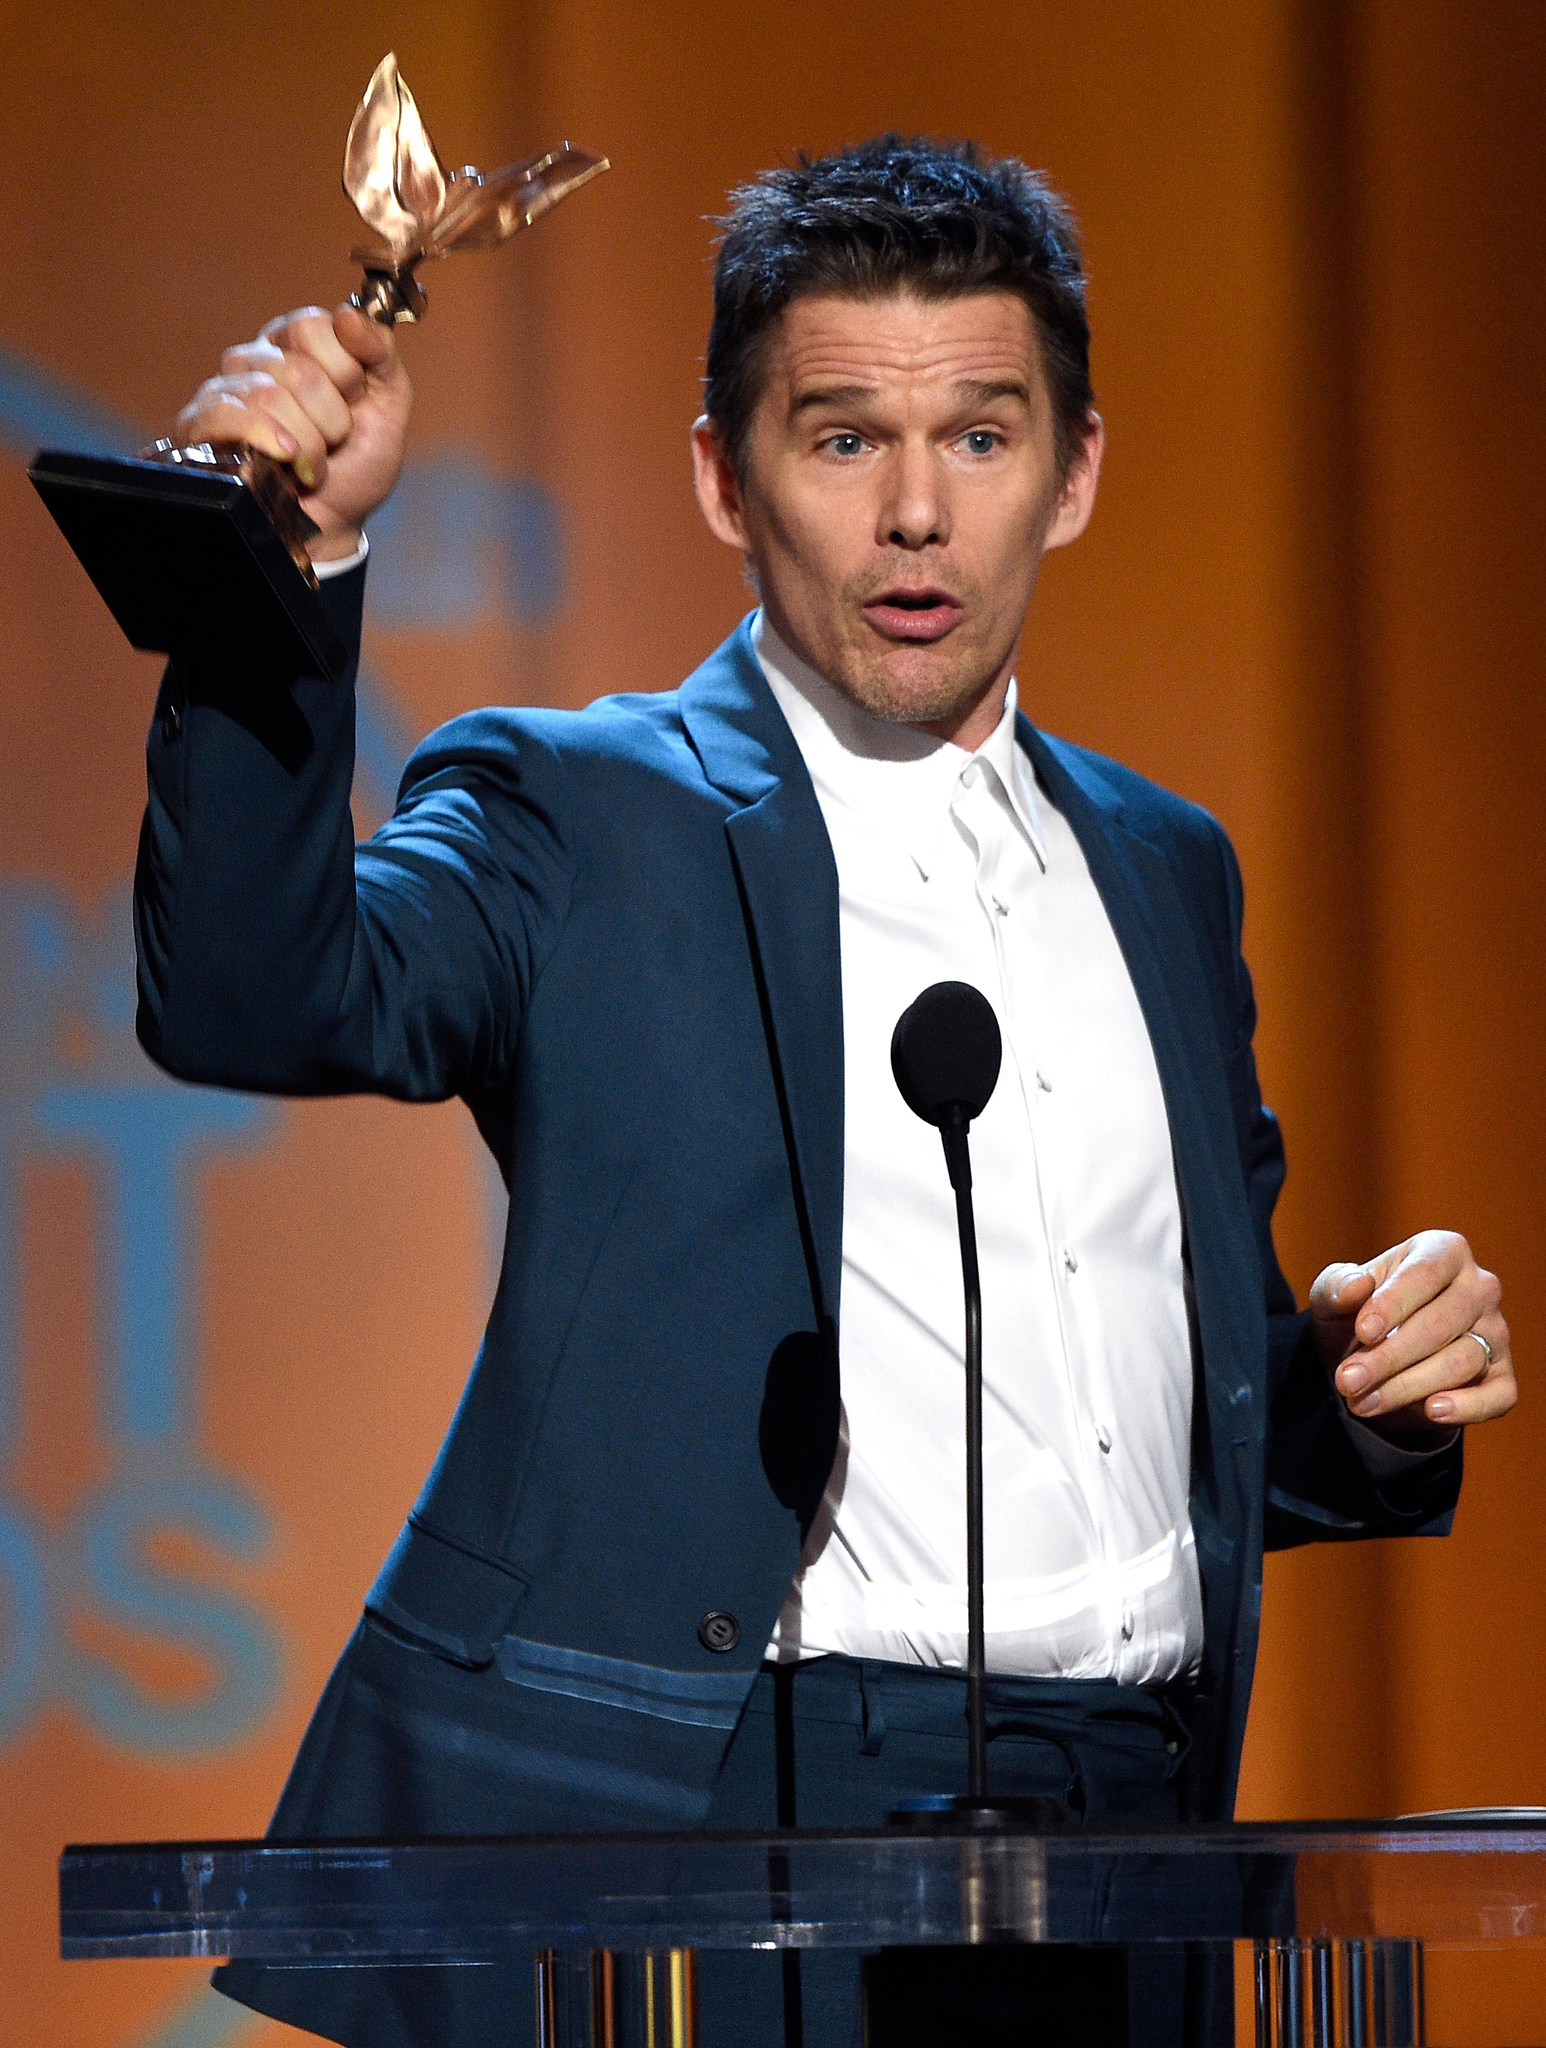 Ethan Hawke at event of 30th Annual Film Independent Spirit Awards (2015)